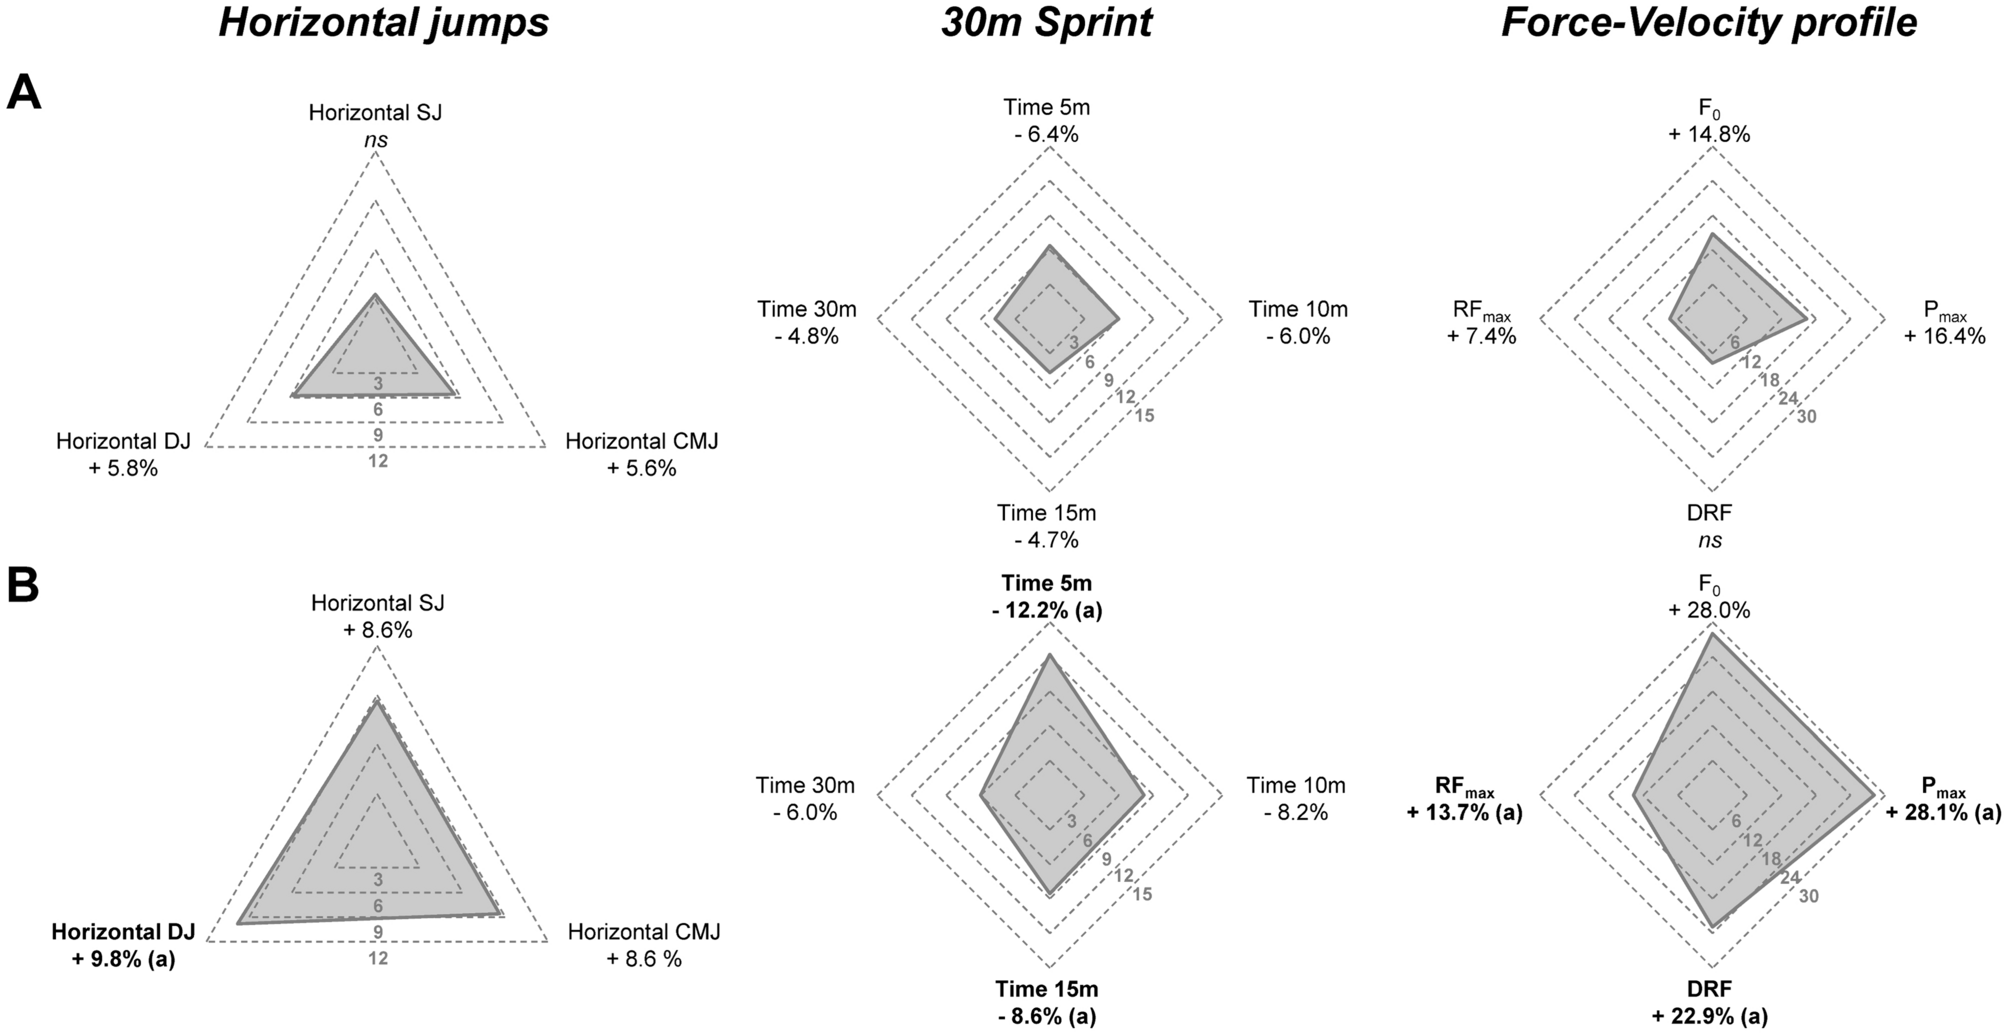 Effects of vertical and horizontal plyometric training on jump performances and sprint force–velocity profile in young elite soccer players